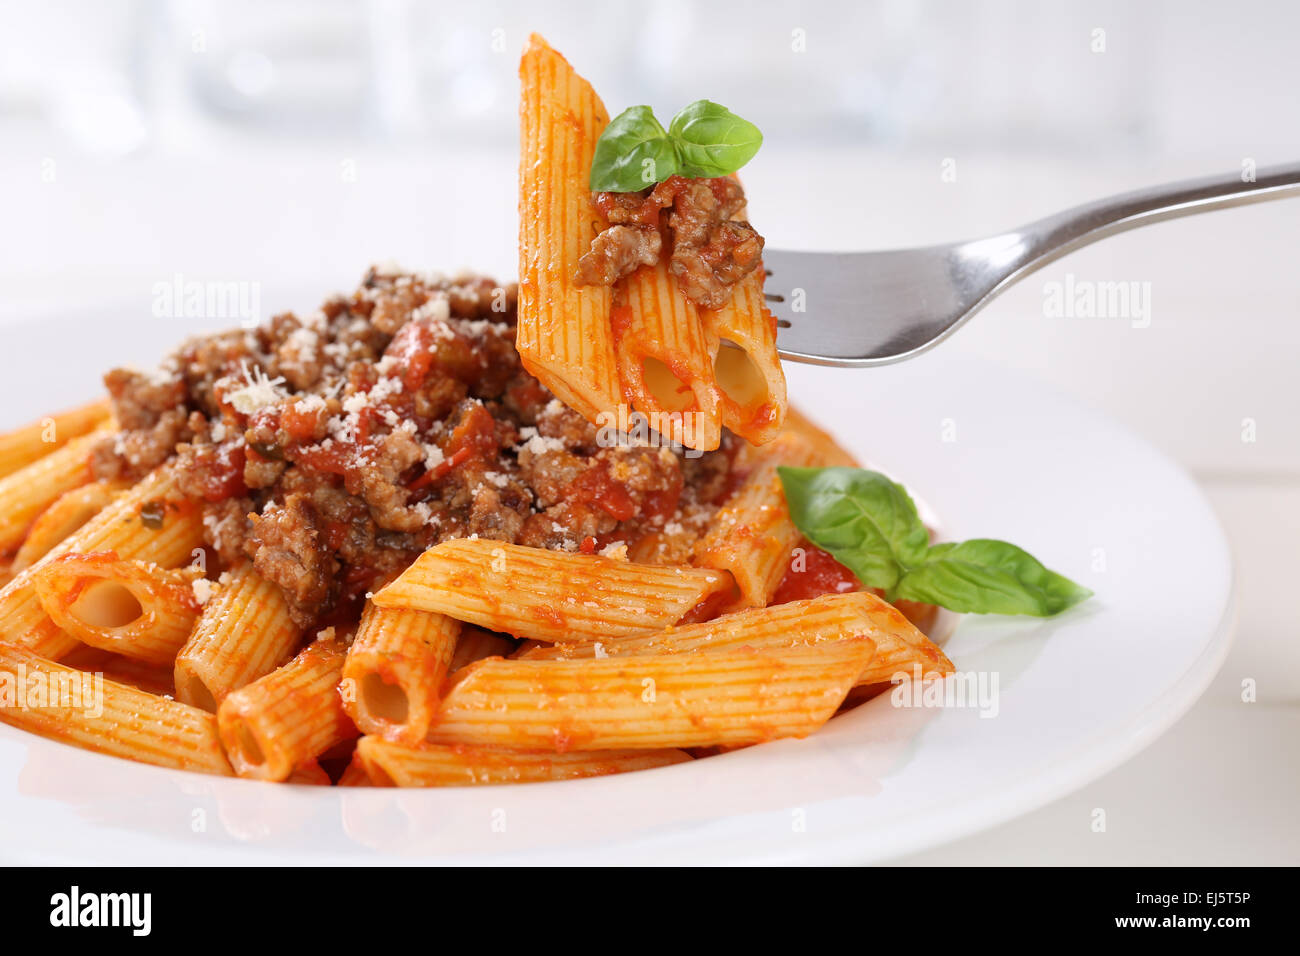 Eating Penne Rigate Bolognese or Bolognaise sauce noodles pasta meal on a  plate Stock Photo - Alamy